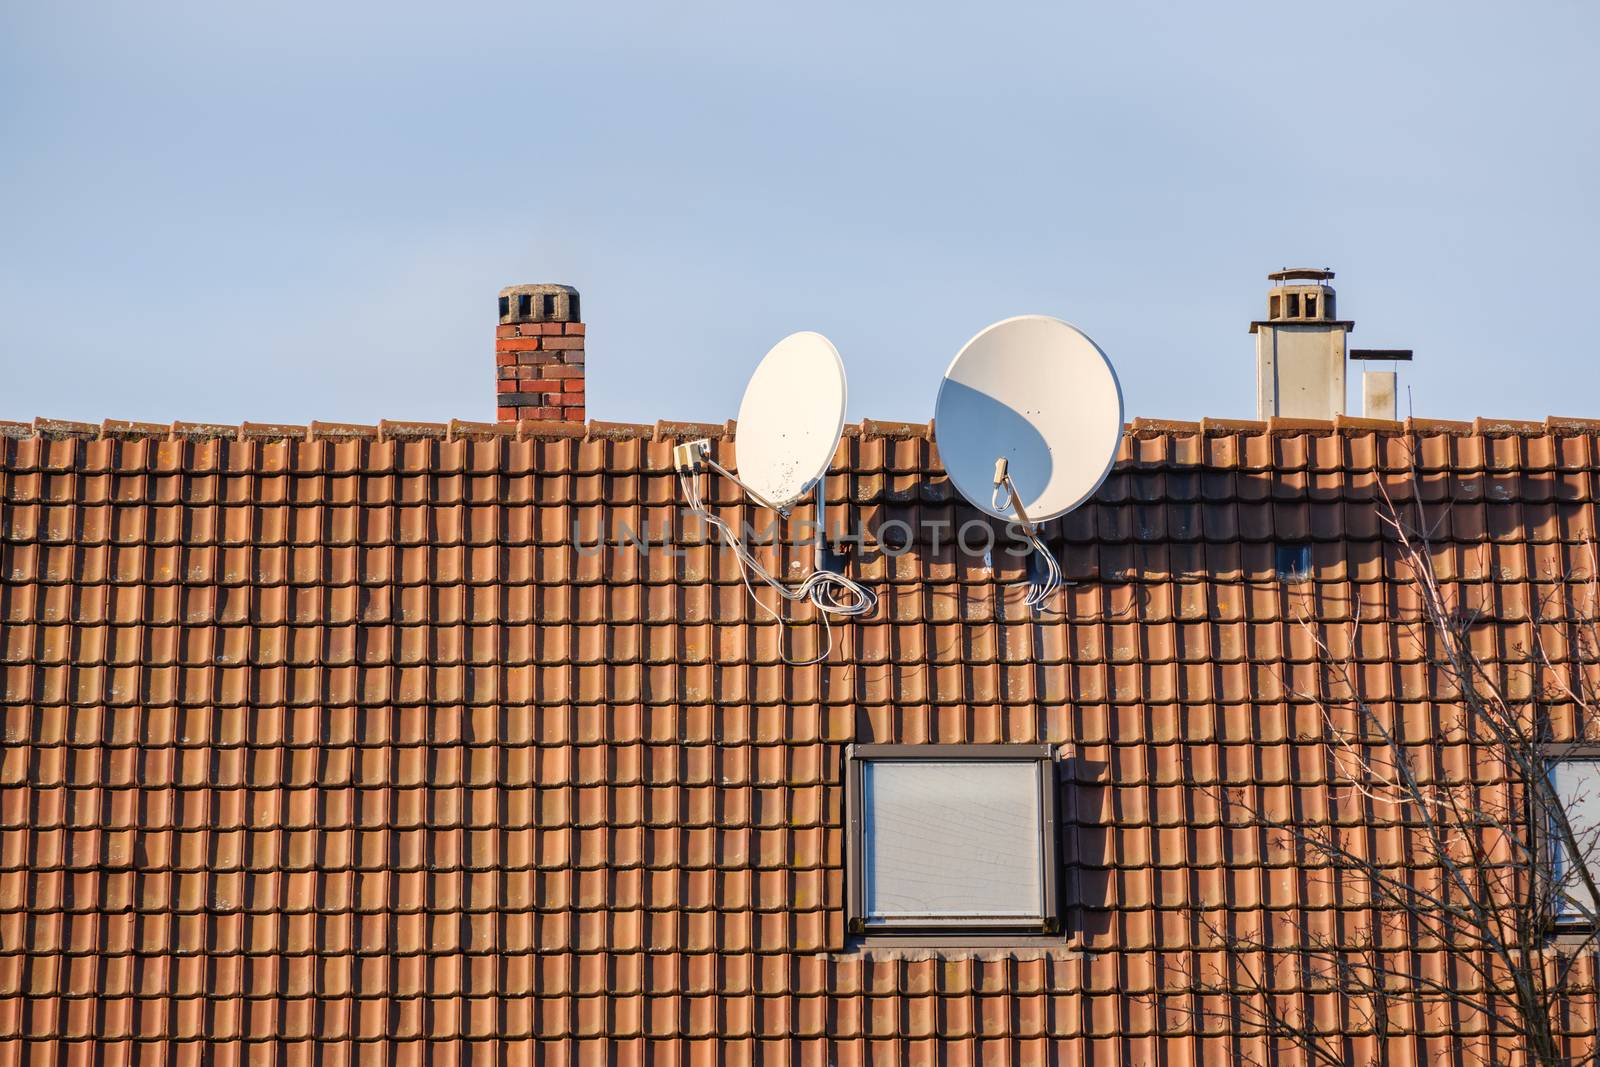 An image of a satellite dish at a roof with space for your text